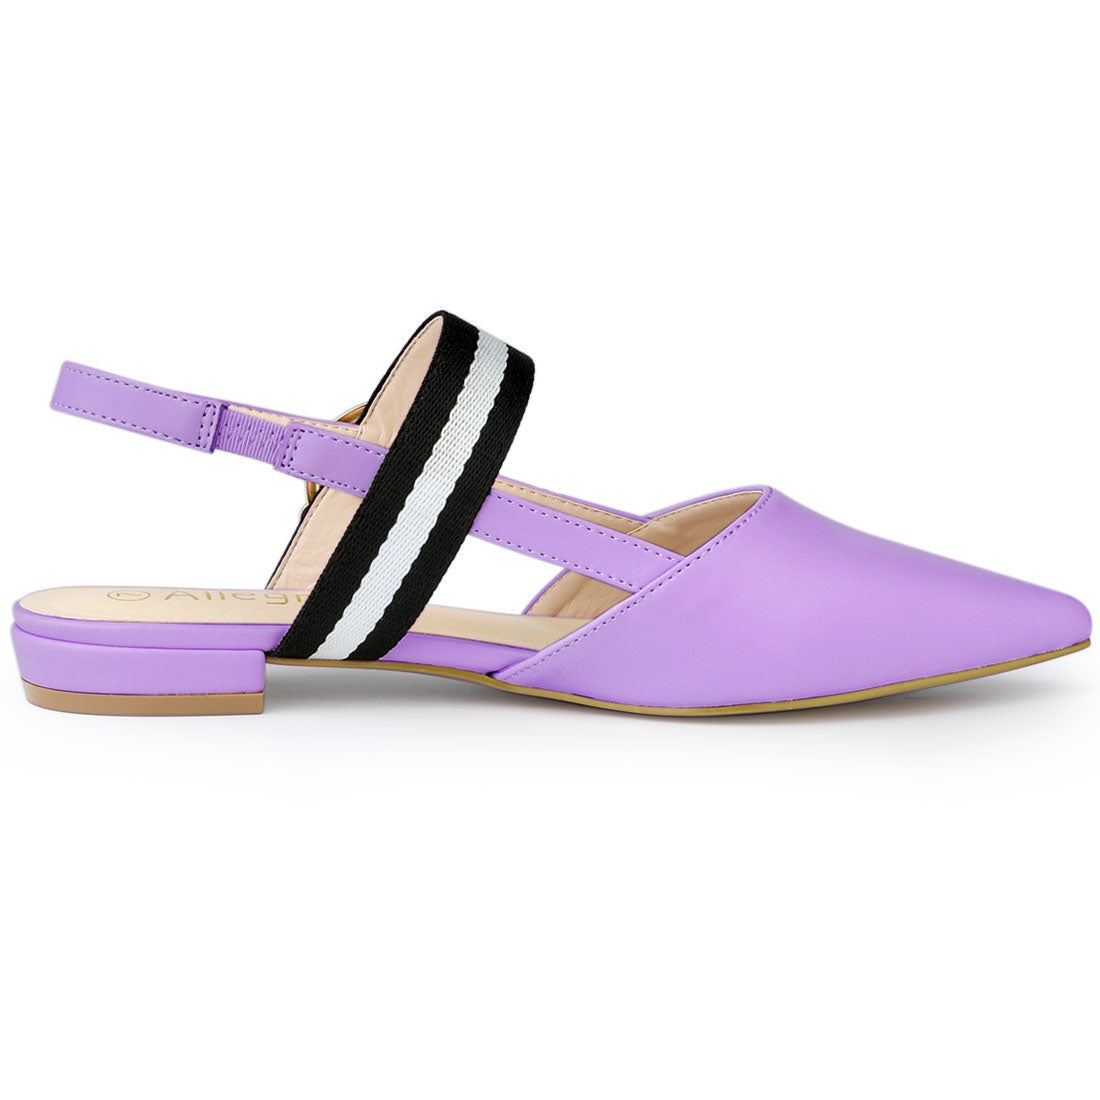 Allegra K Pointed Toe Contrast Color Slingback PU Leather Flat Mules